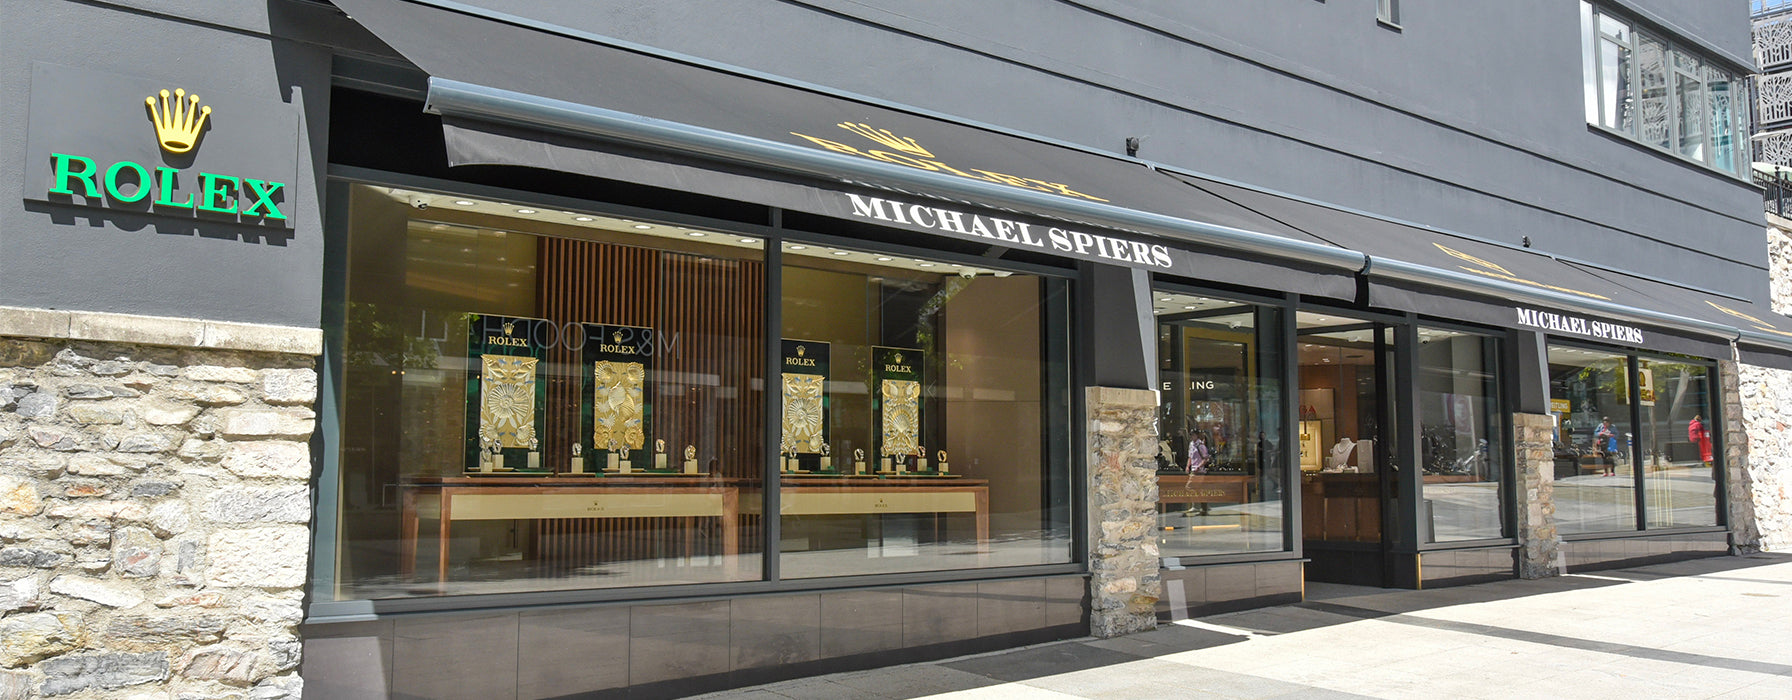 Michael Spiers jewellery store front in Plymouth. The store is situated on Cornwall Street just around the corner from Drake’s Circus Shopping Centre where you can see a range of fine jewellery from rings, necklaces, earrings, and bracelets to luxury watch brands such as Rolex, Omega, Breitling, and Tudor.